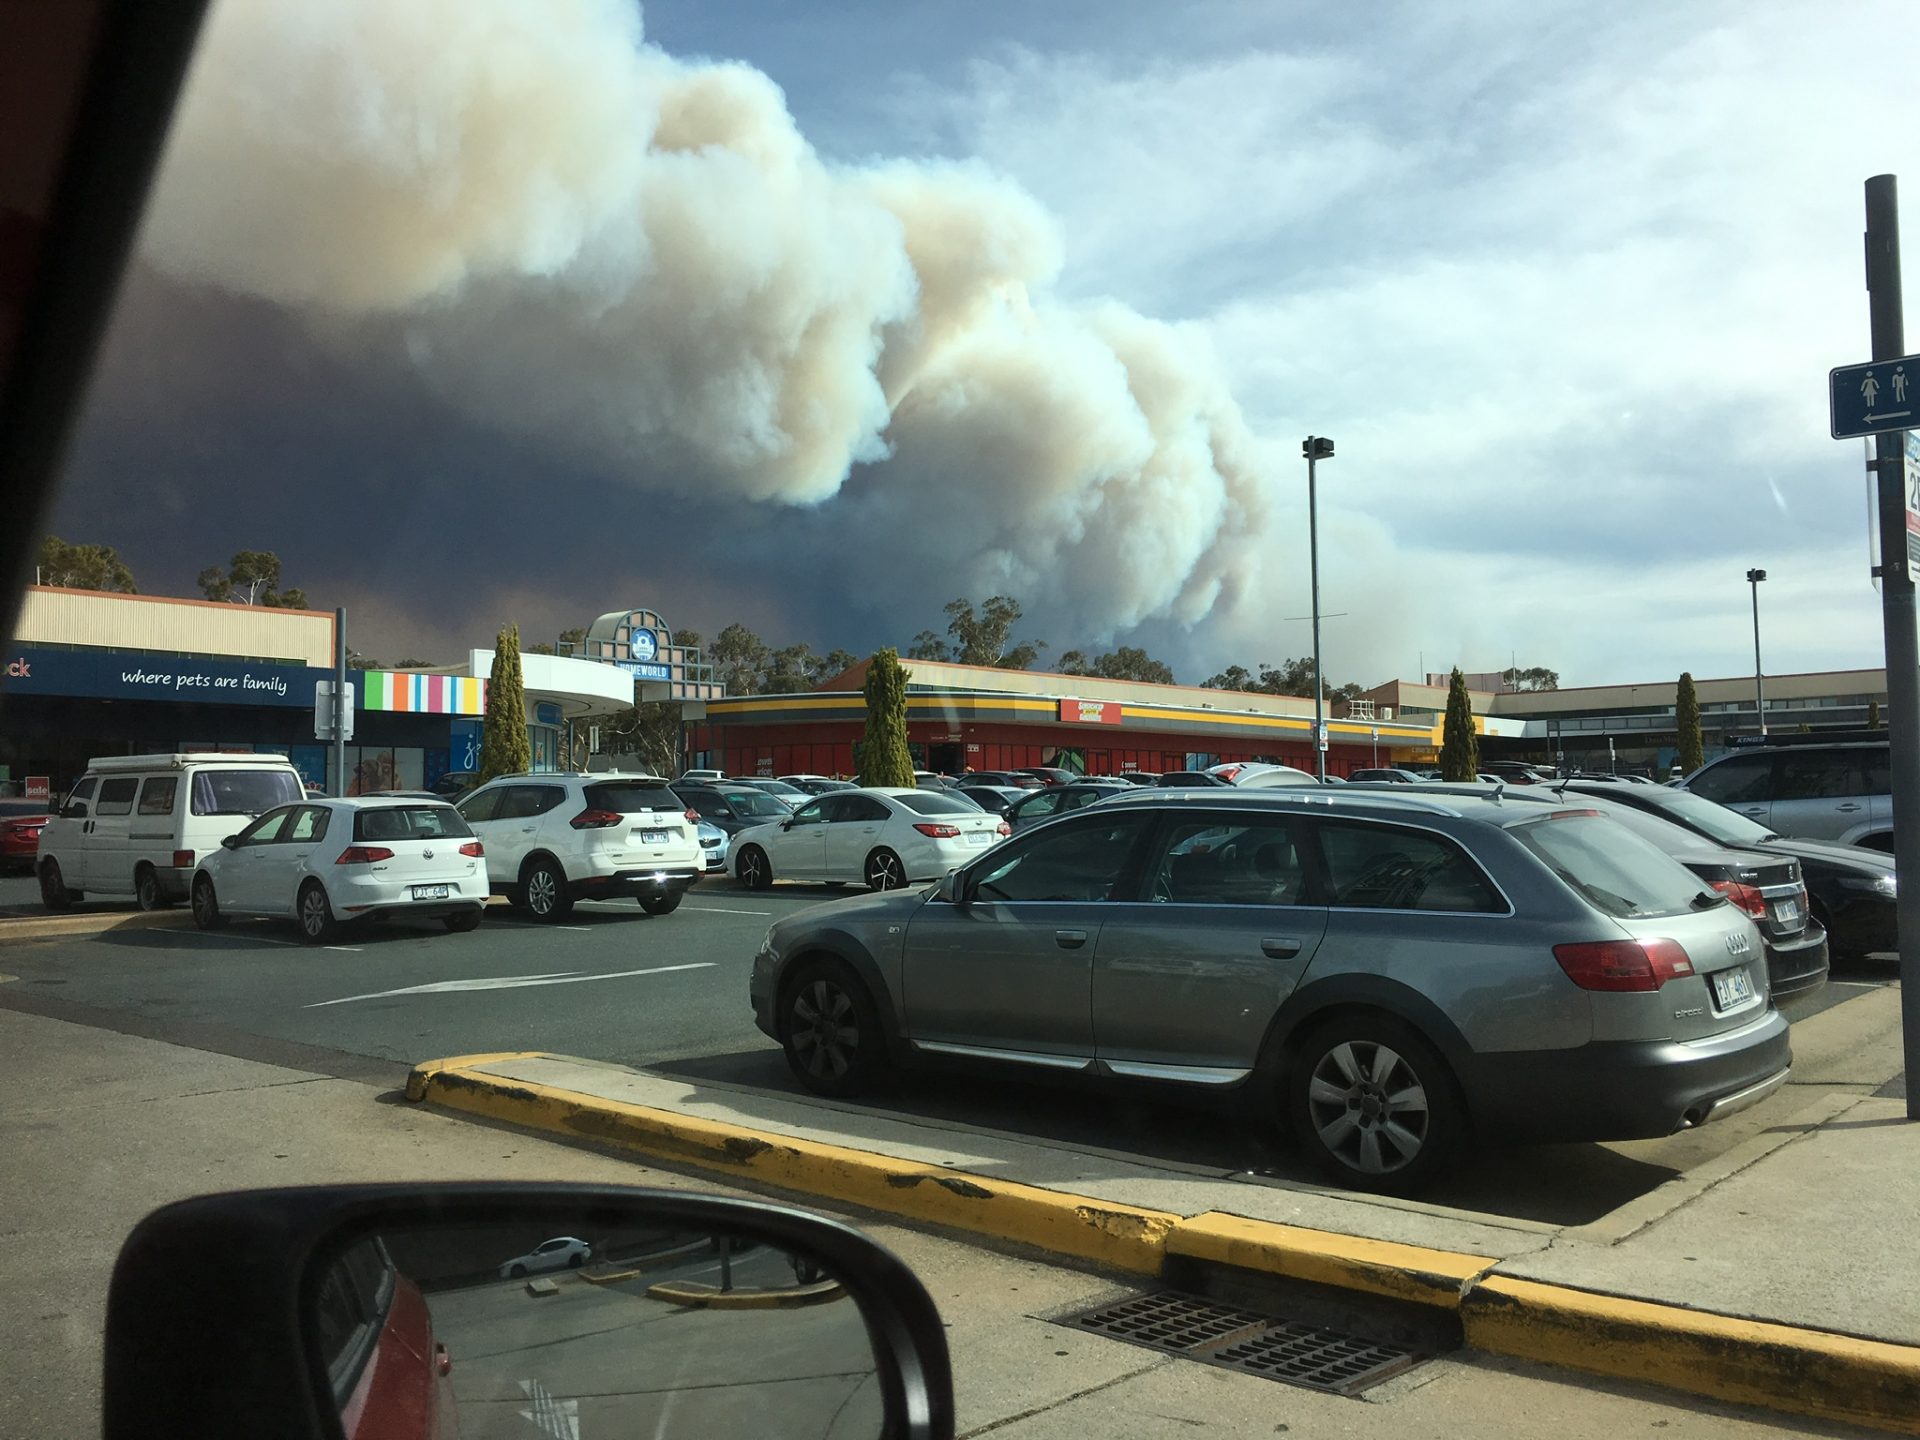 Smoke billowing over shopping centre in a car park